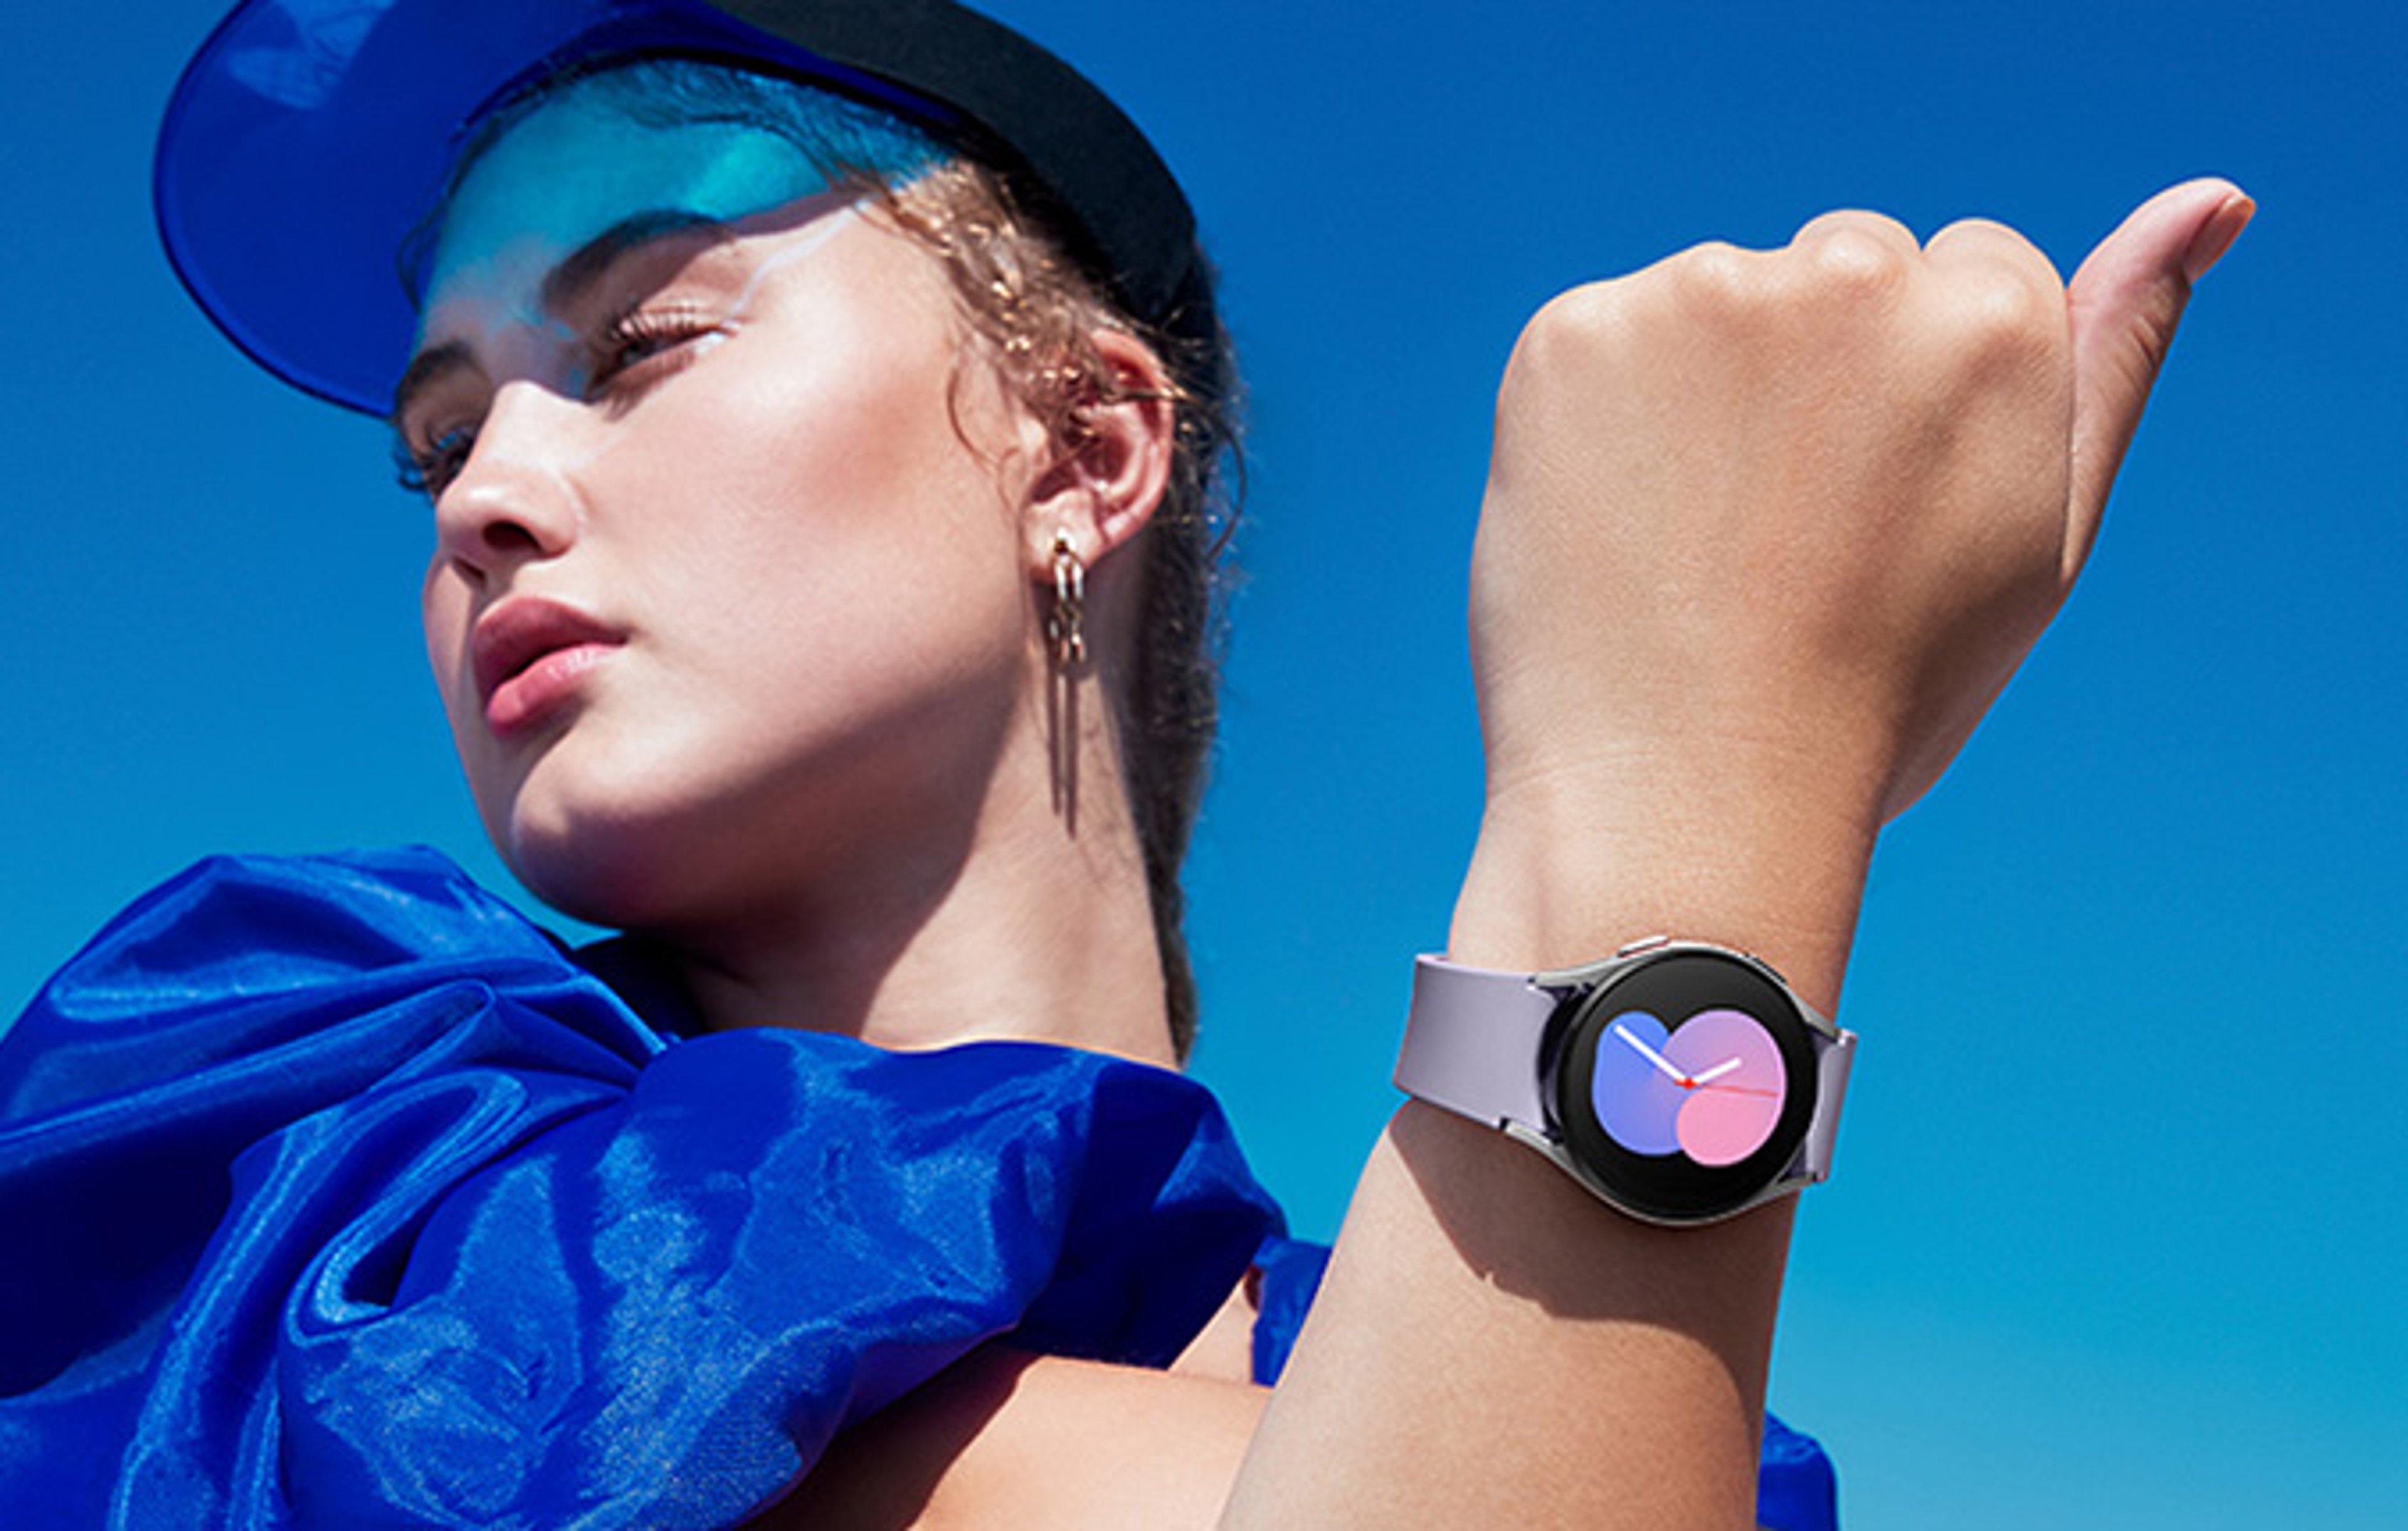 Woman wearing designer blue outfit and cap, showing smartwatch on wrist.